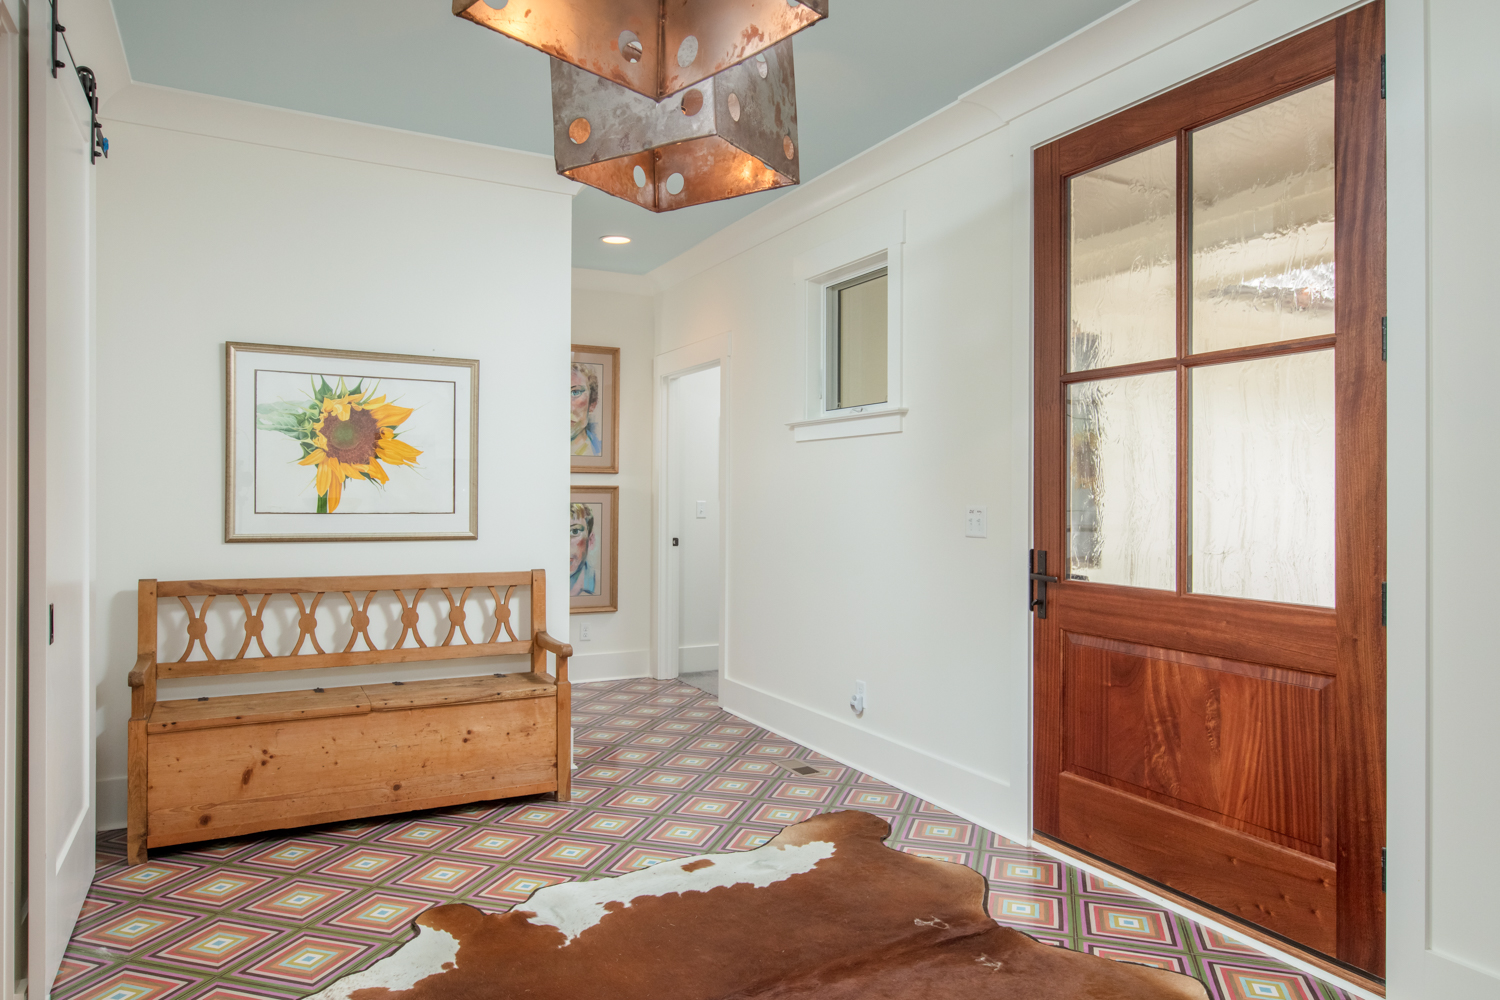 Entryway to home with a cowhide rug.